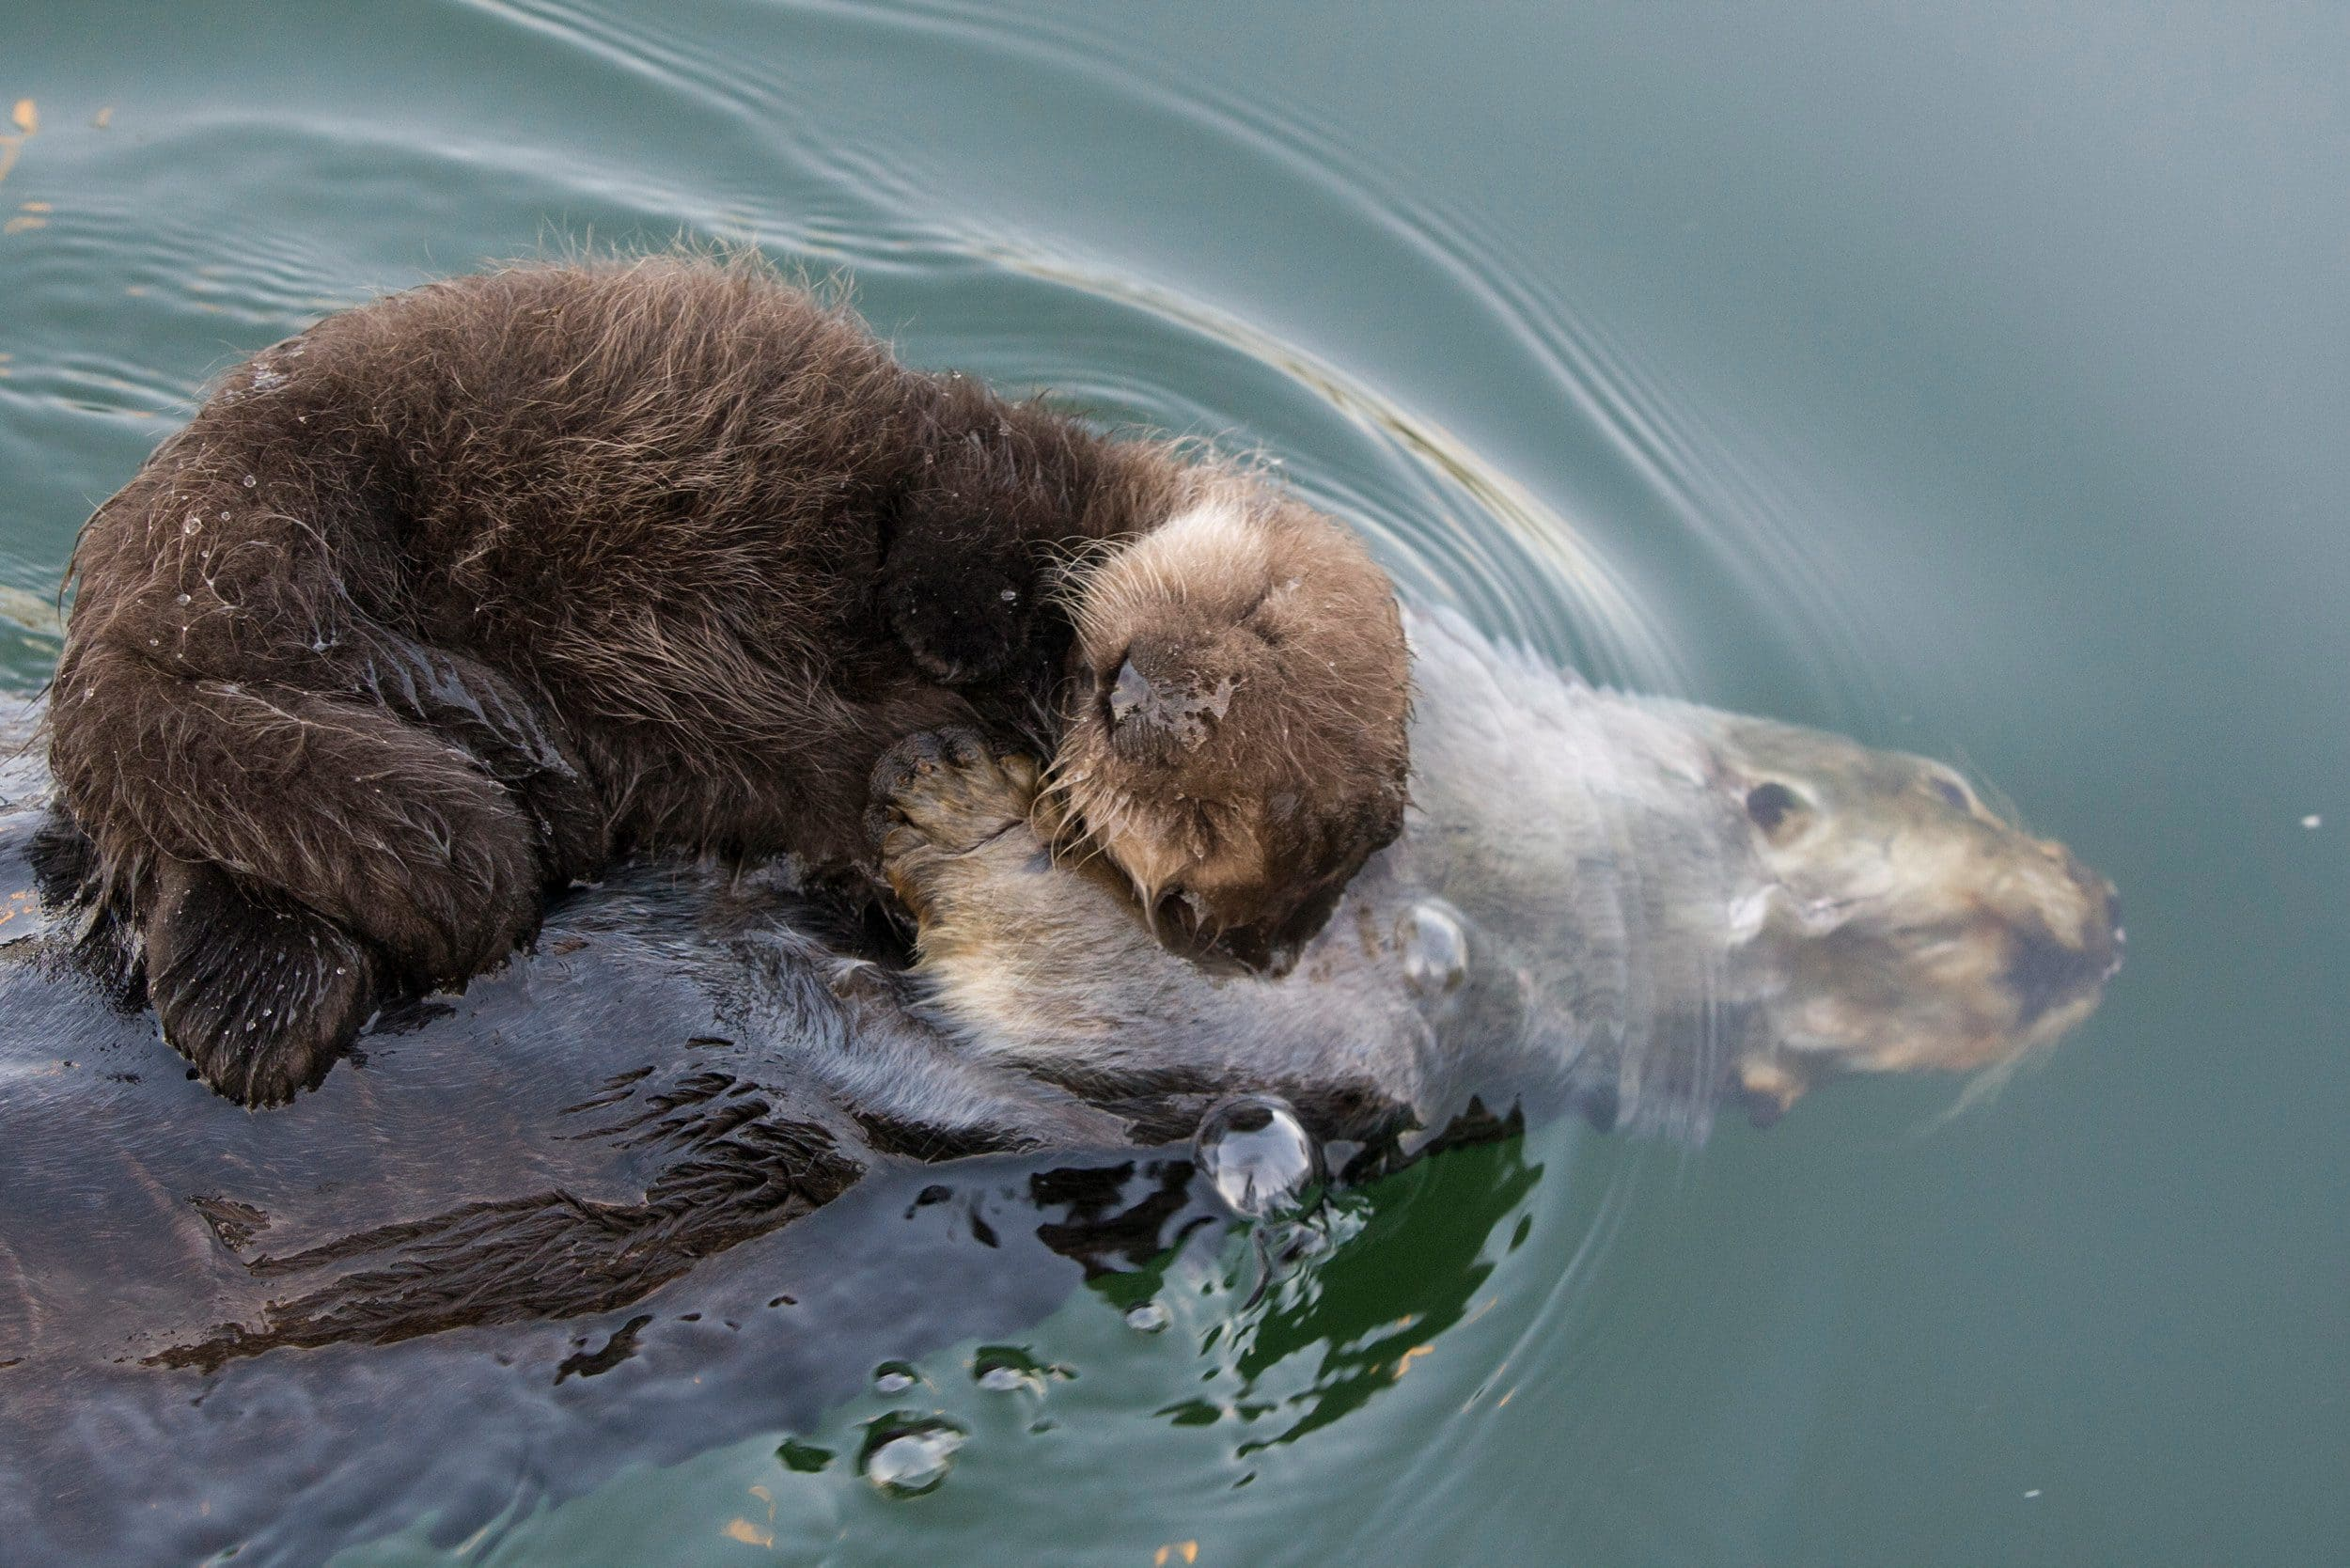 Amazing Photos of Mother Otter letting her baby ride on her belly while swimming